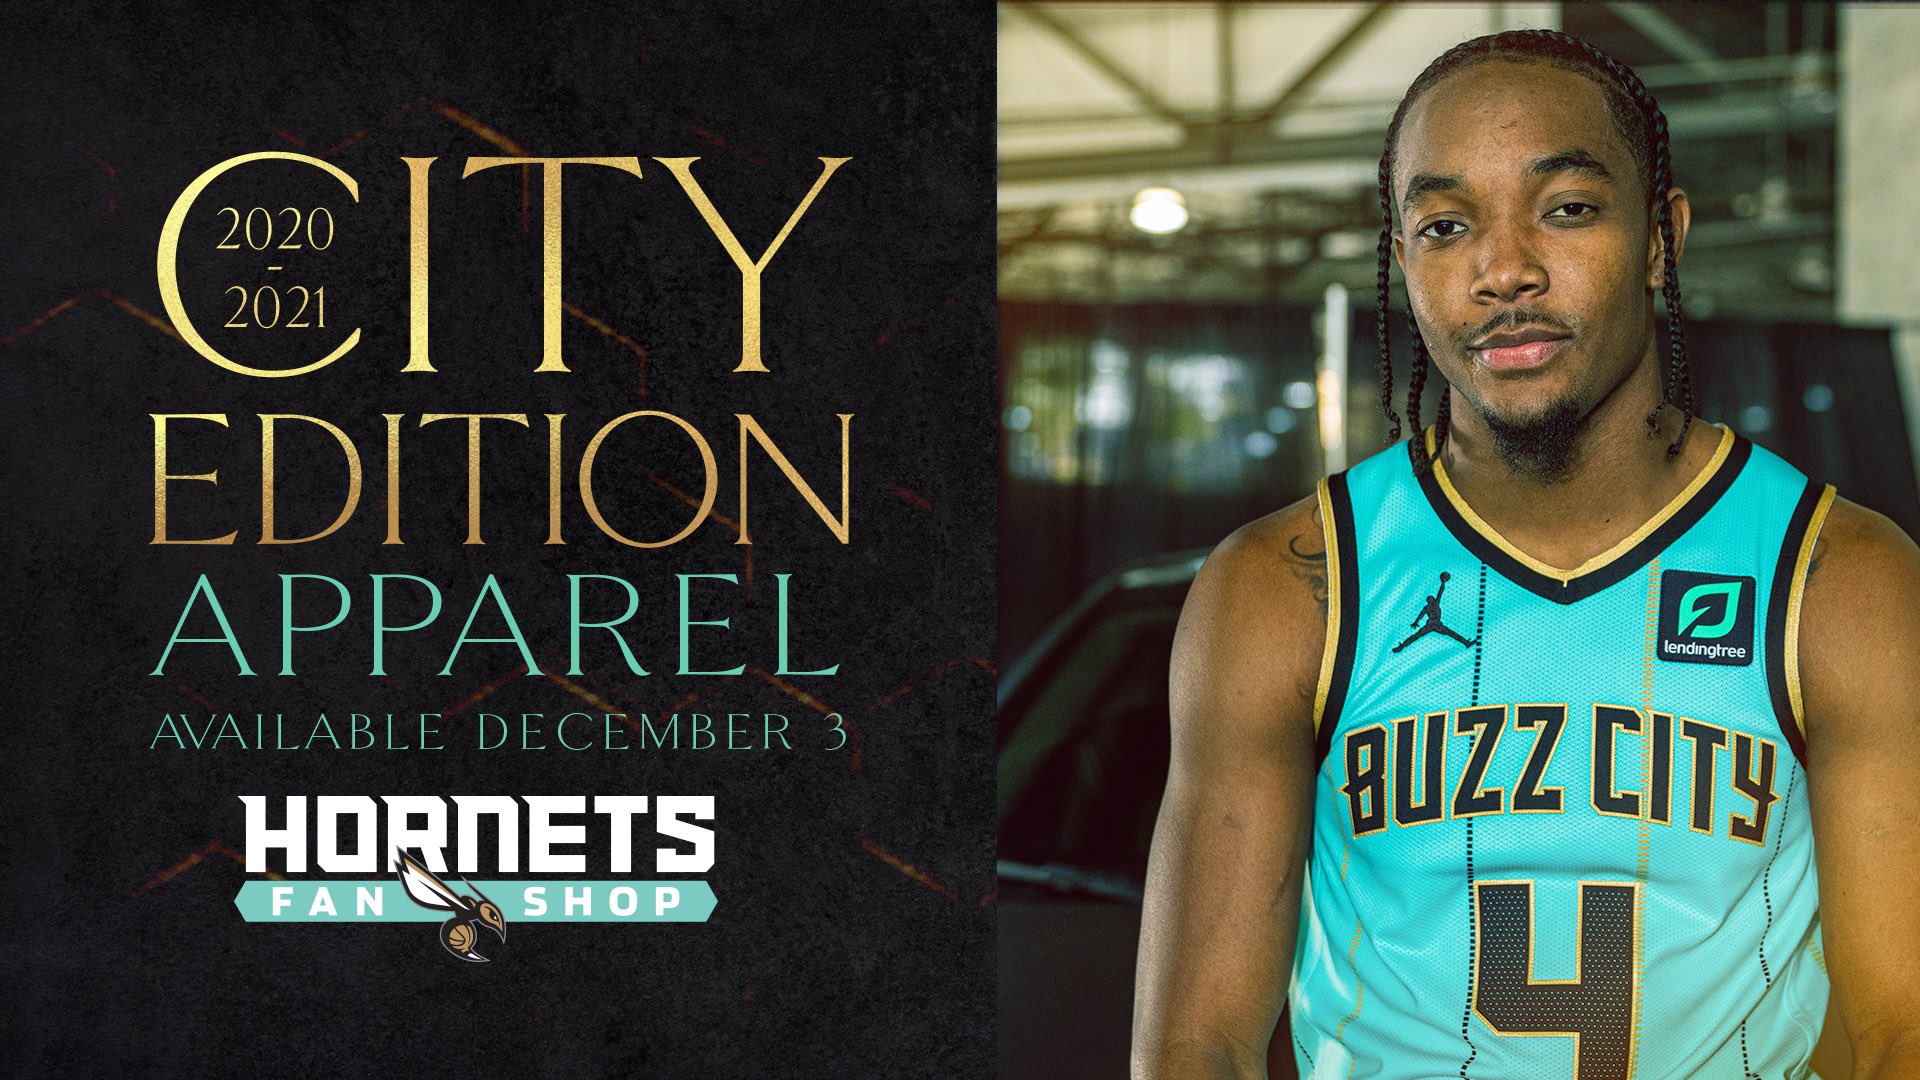 Charlotte Hornets On Twitter Buzz City Minted Apparel Will Be Available Tomorrow Https T Co Tps1bip5xx